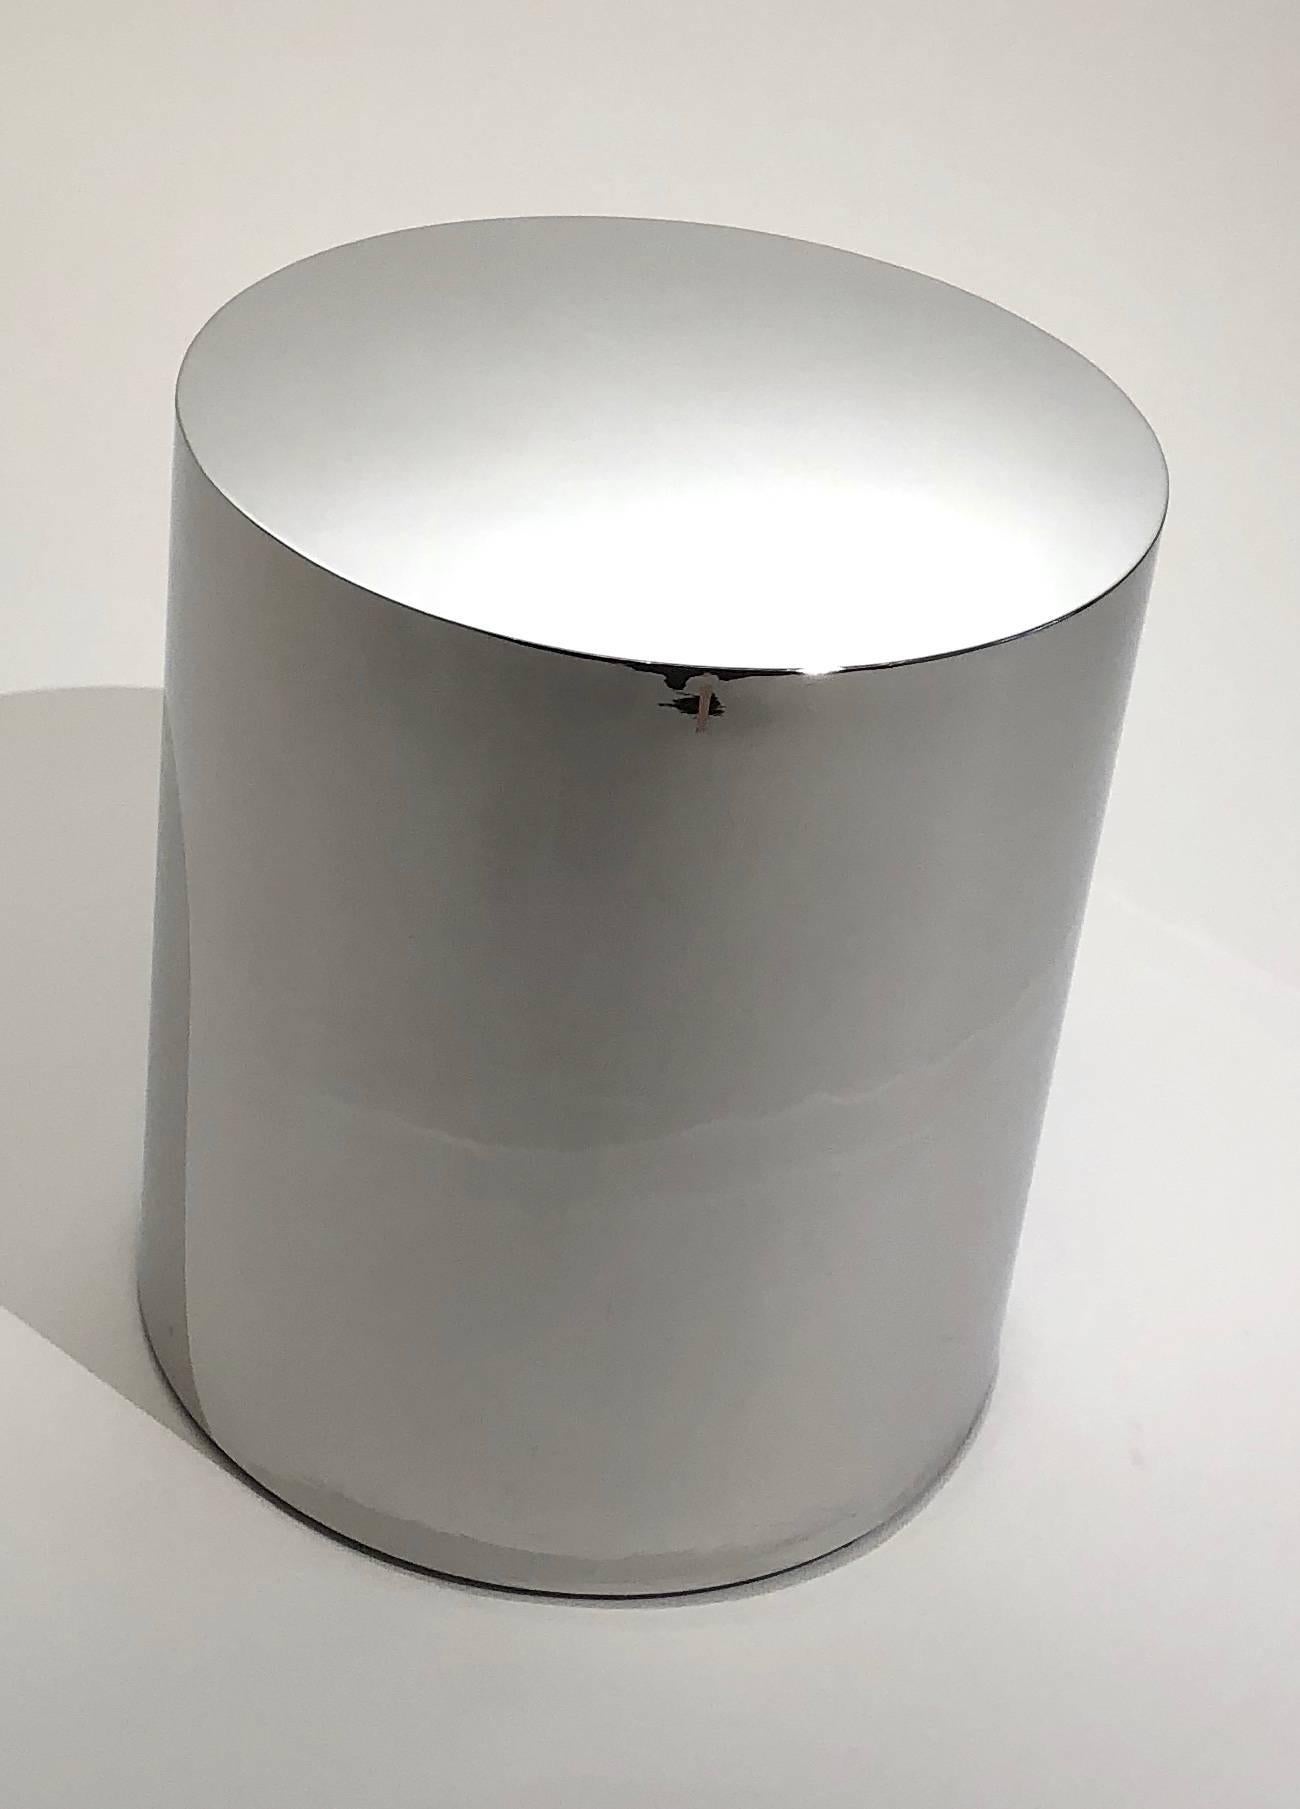 Seamless cylinder chrome side table with felt covered bottom.